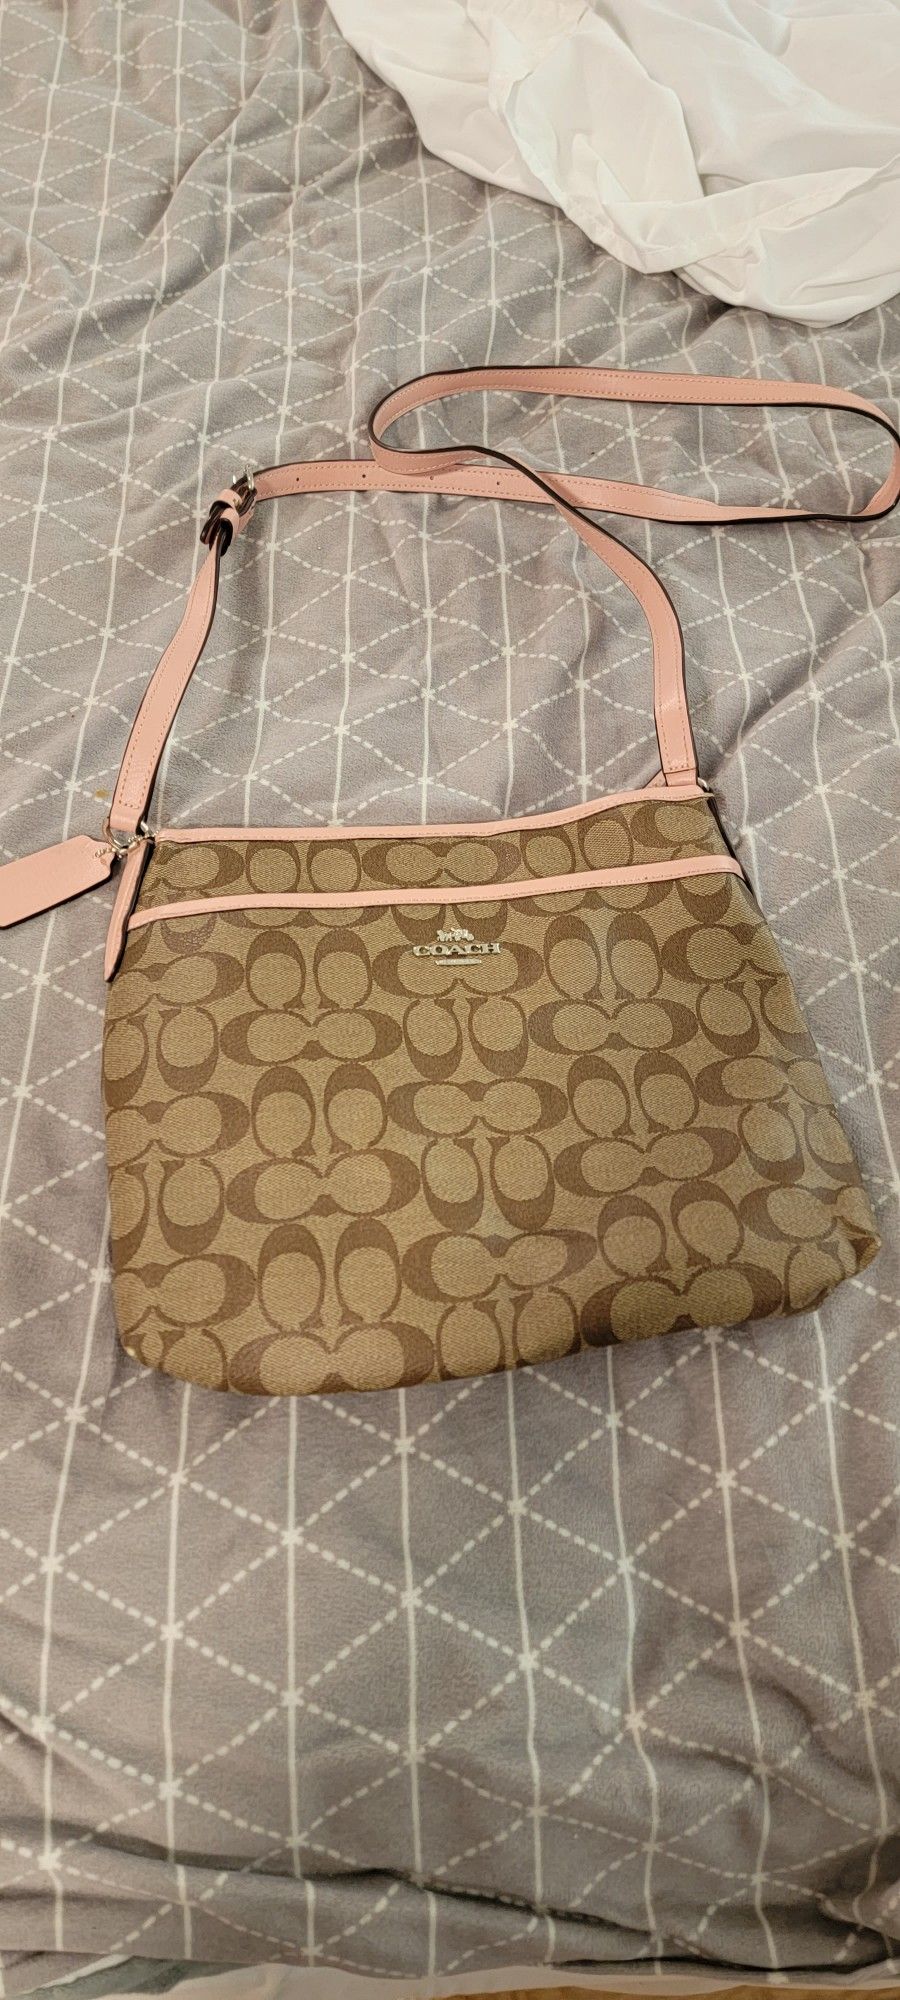 CHANEL Small Bag for Sale in Sunny Isles Beach, FL - OfferUp